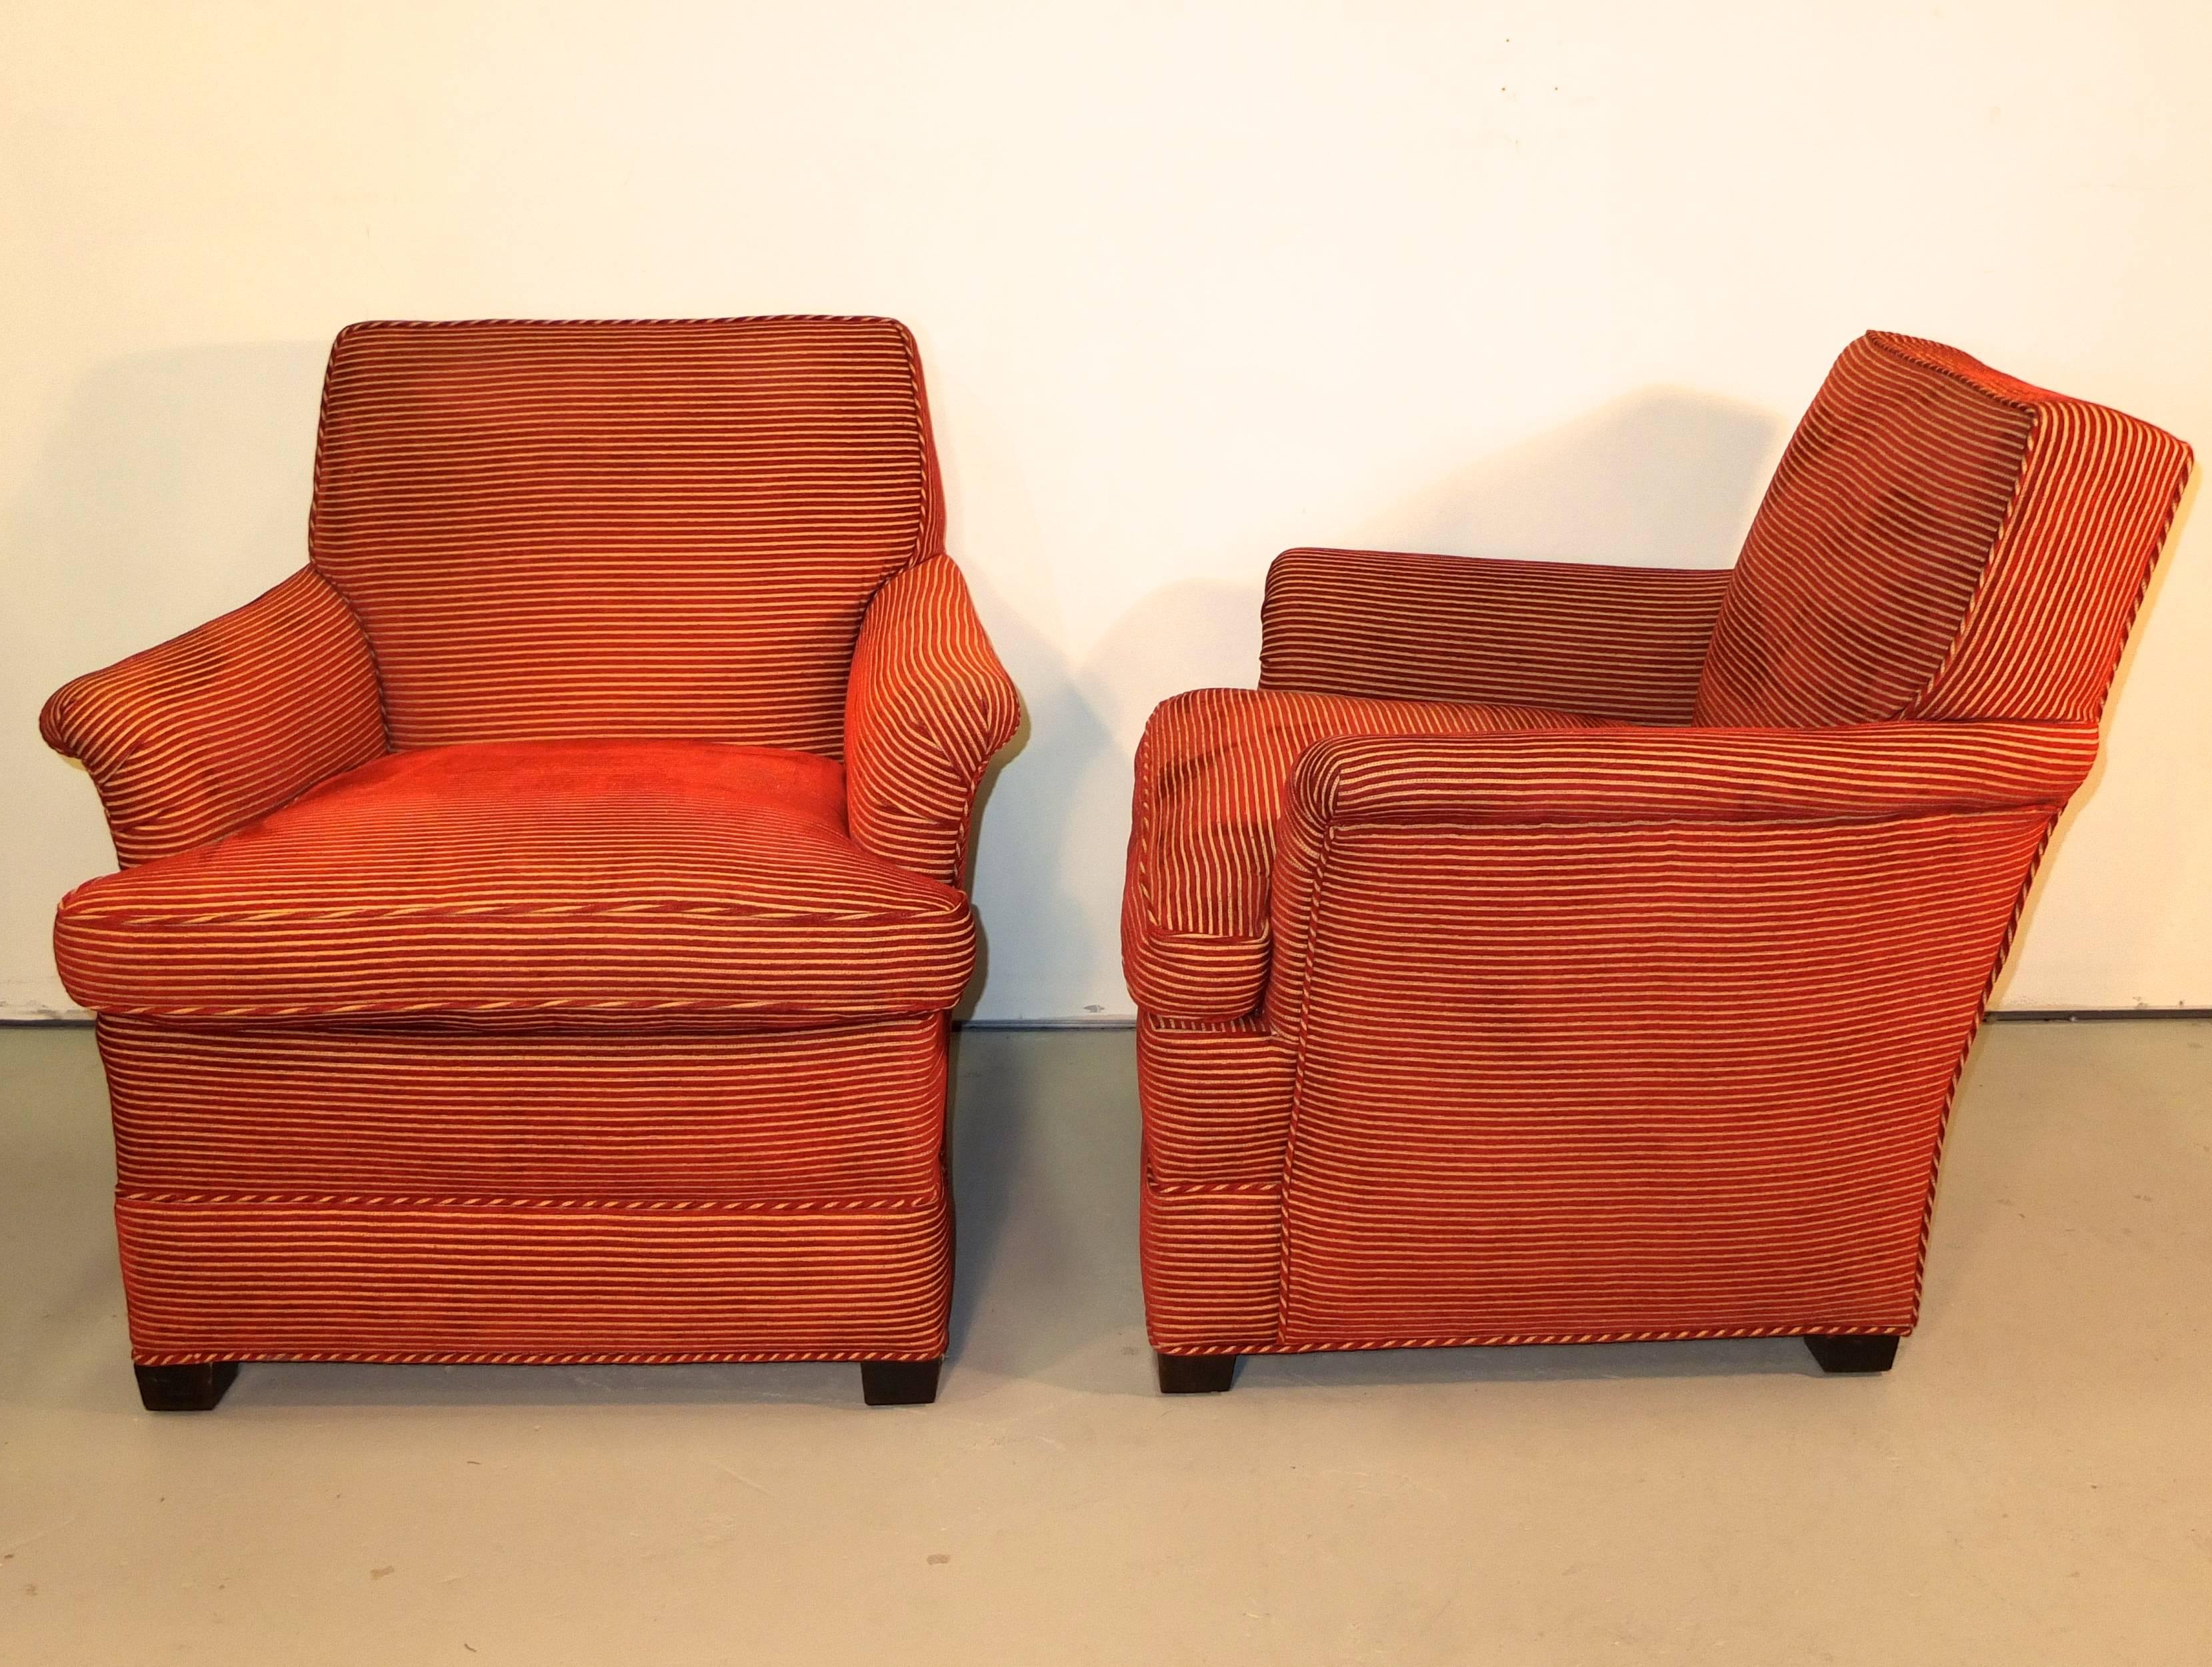 Pair of upholstered armchairs. Loose seat cushion, Mahogany feet. Classic comfort.

Inside seat dimensions 21